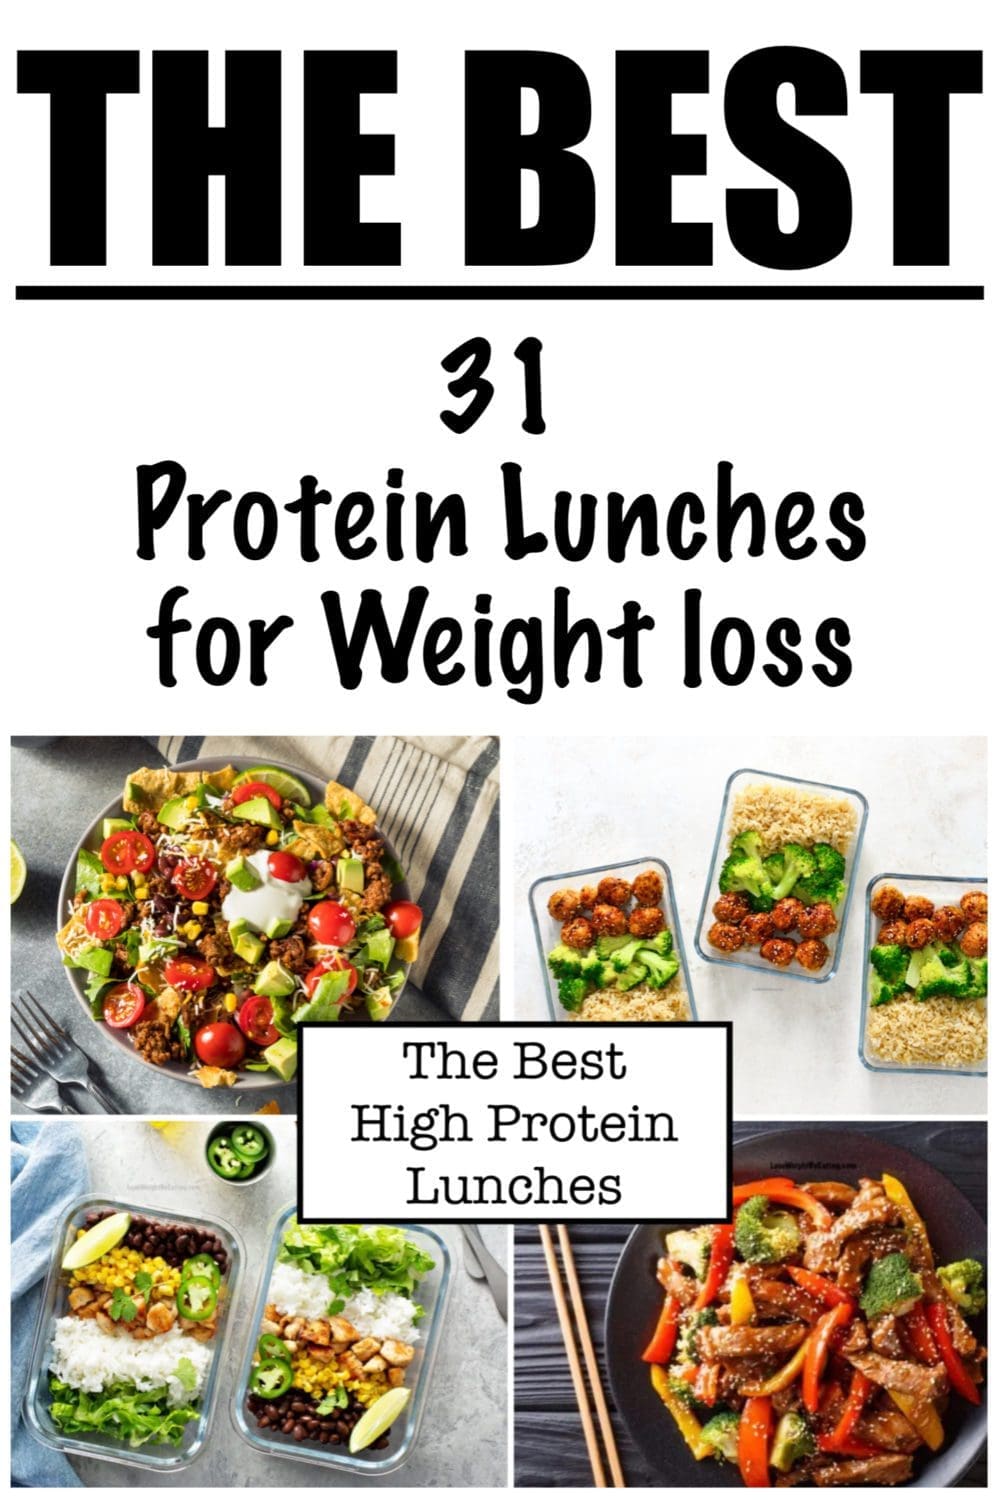 high protein lunches